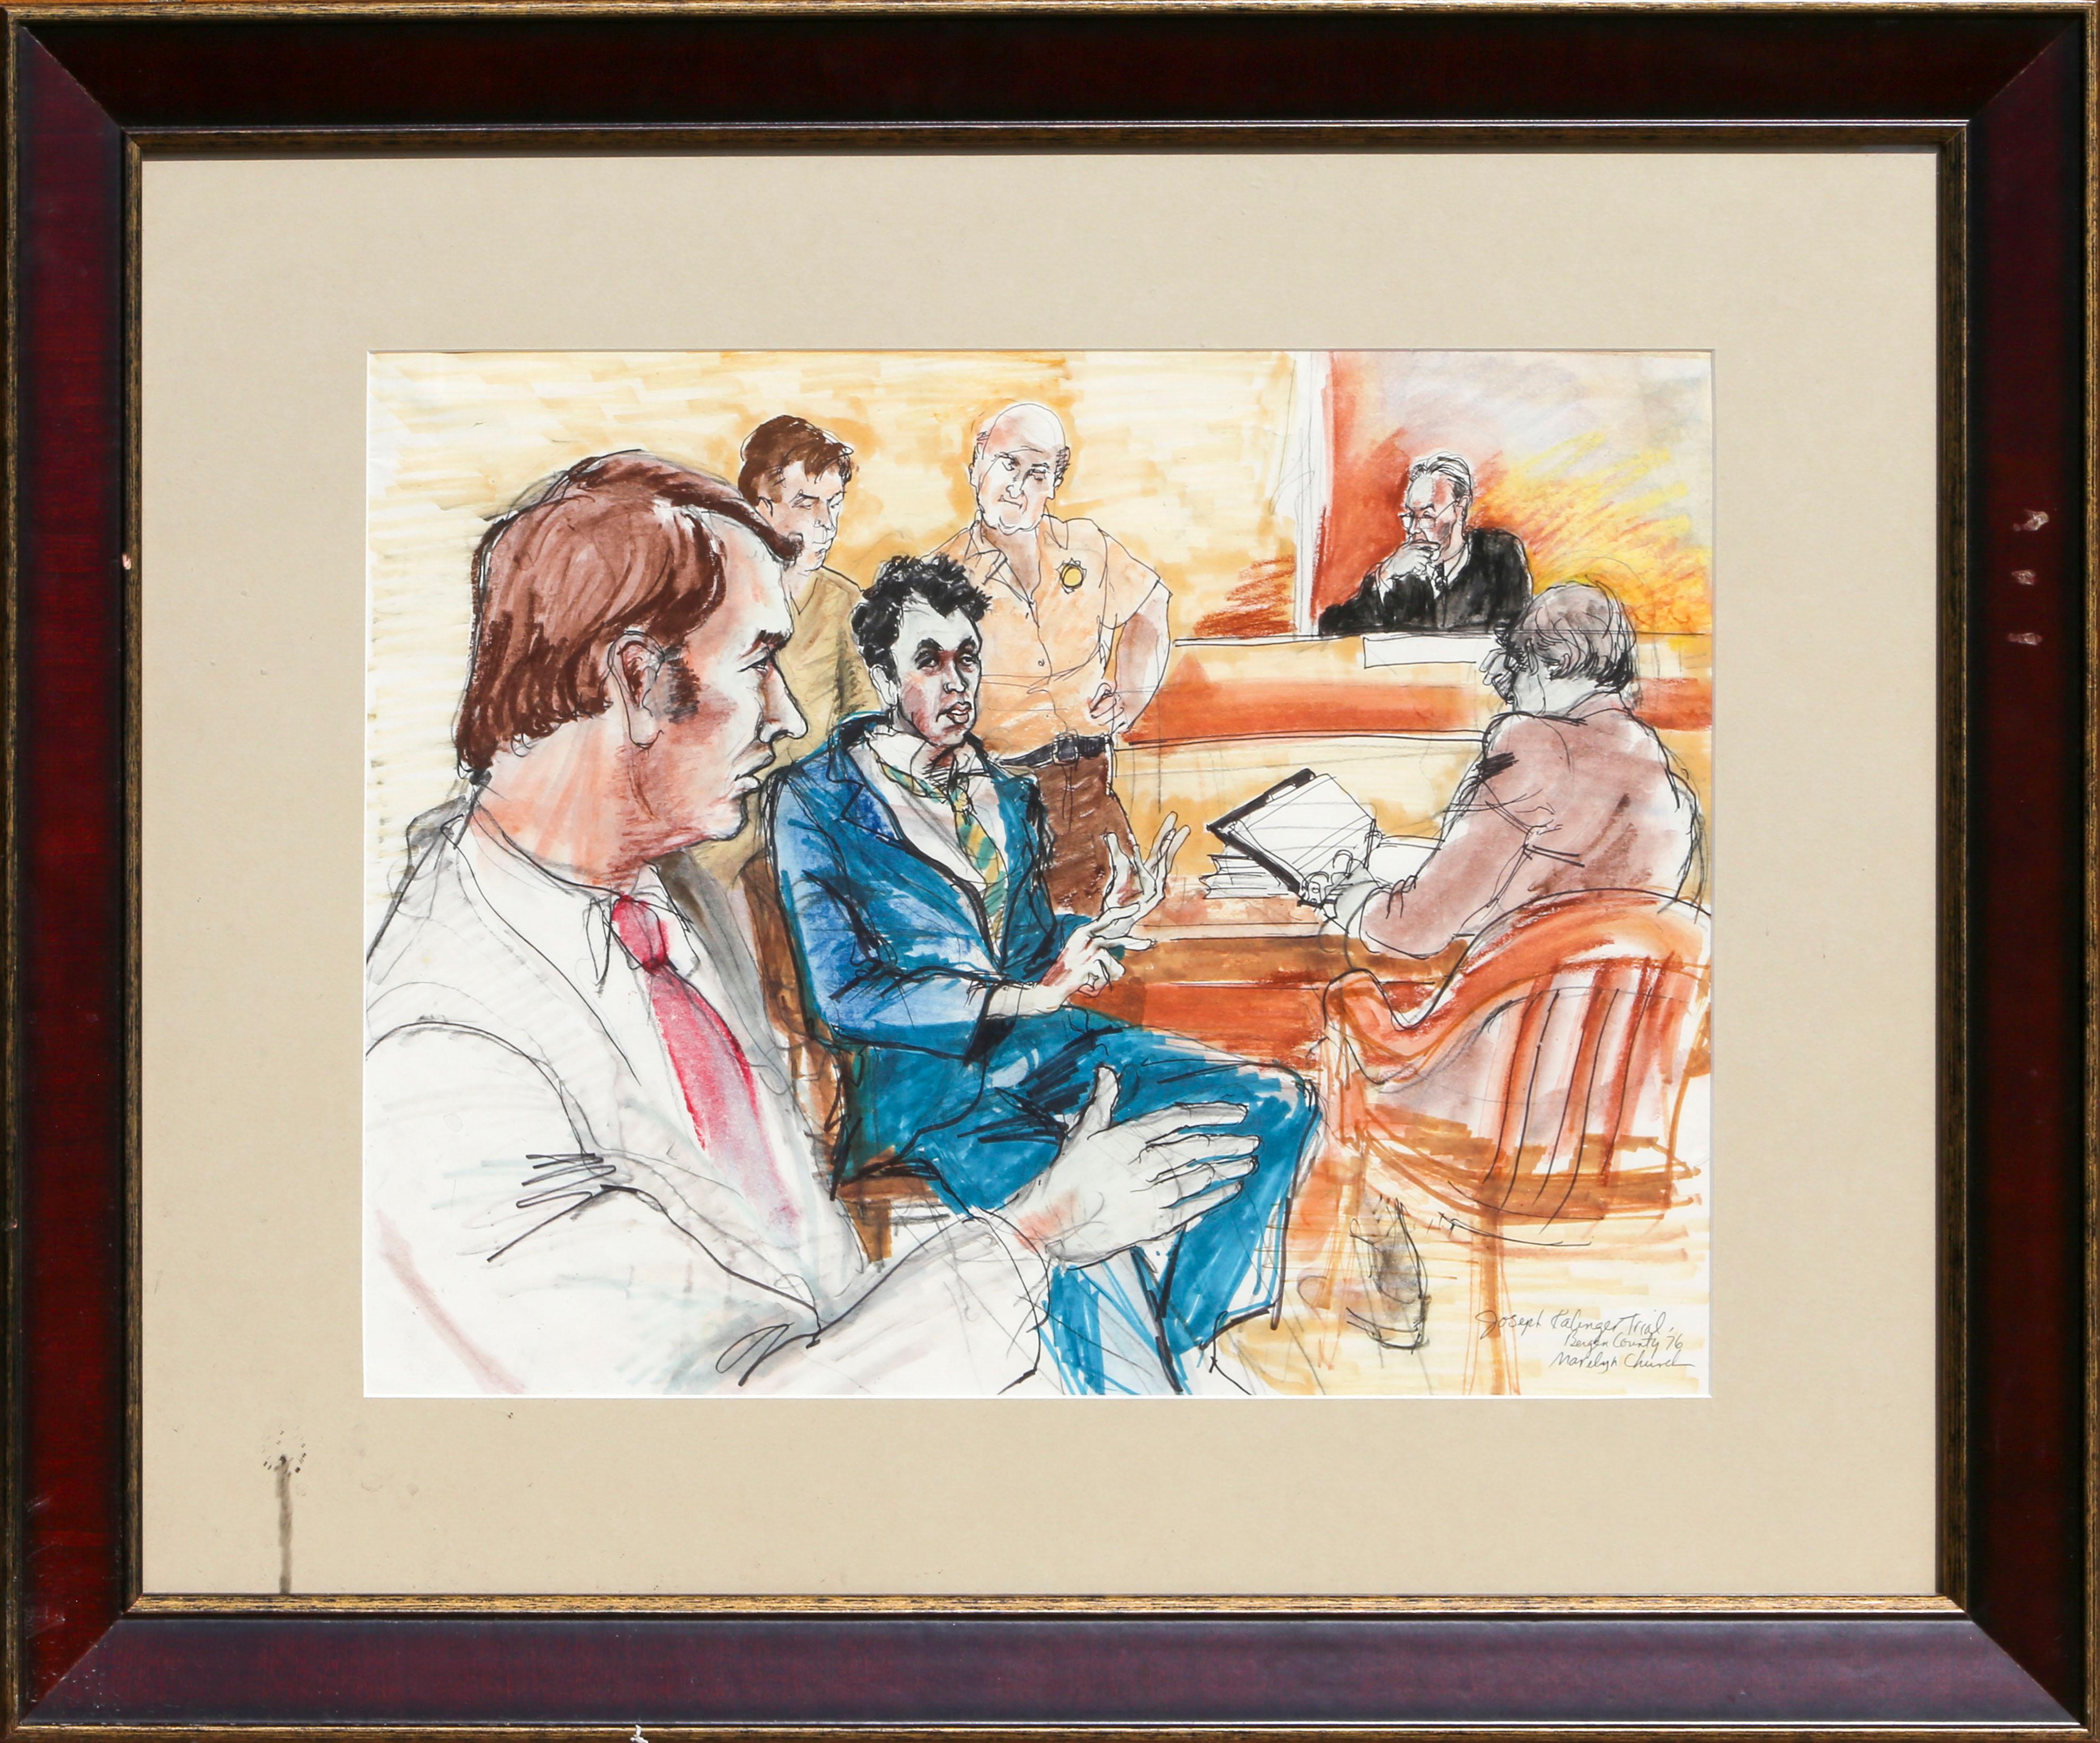 This drawing depicts a moment from one of the longest trials in US history, when Jean Harris, a headmistress of a school for girls in Virginia, was tried for 14 weeks for the murder of her ex-lover, Herman Tarnower. Harris was eventually convicted